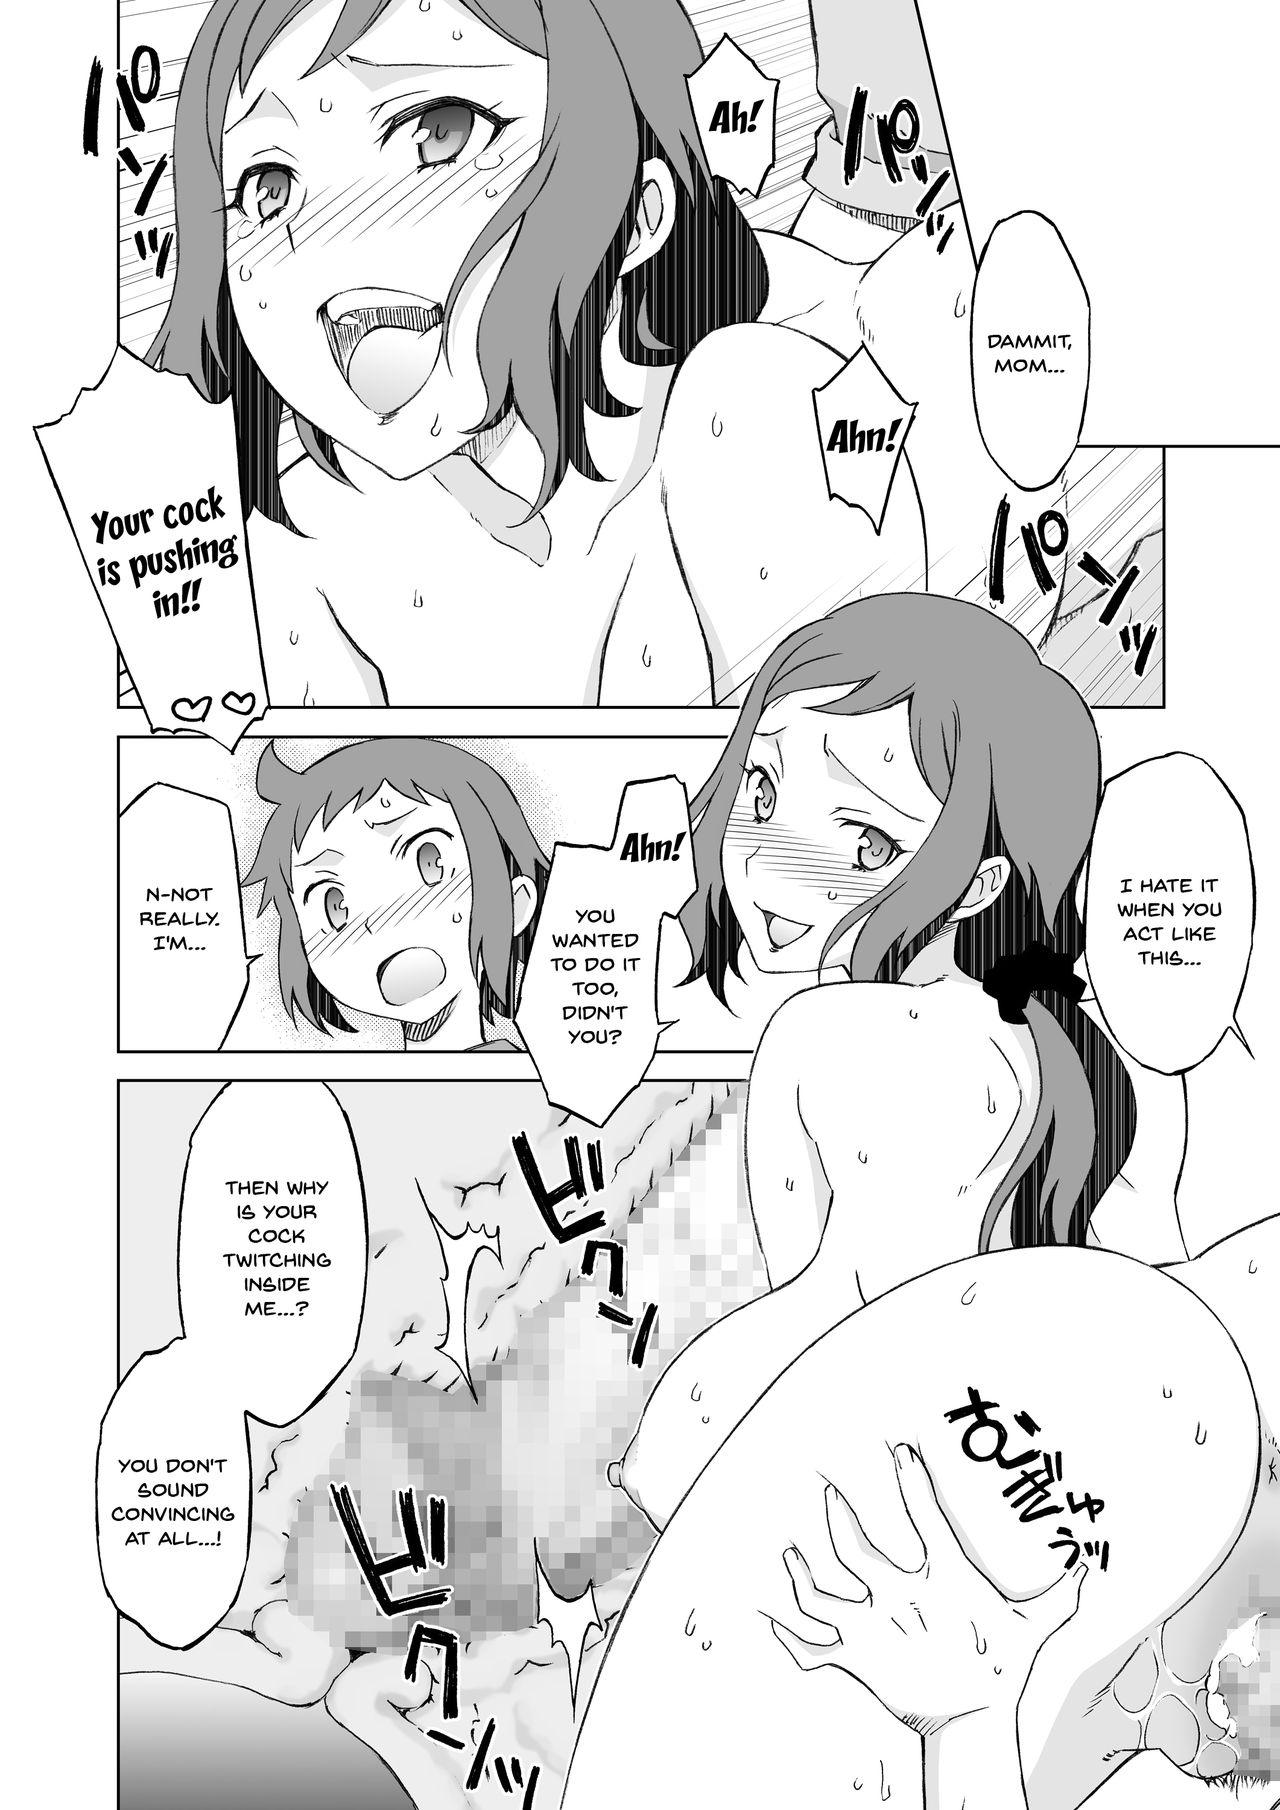 Gay Solo Build Fuckers 2 - Gundam build fighters Naked Women Fucking - Page 6